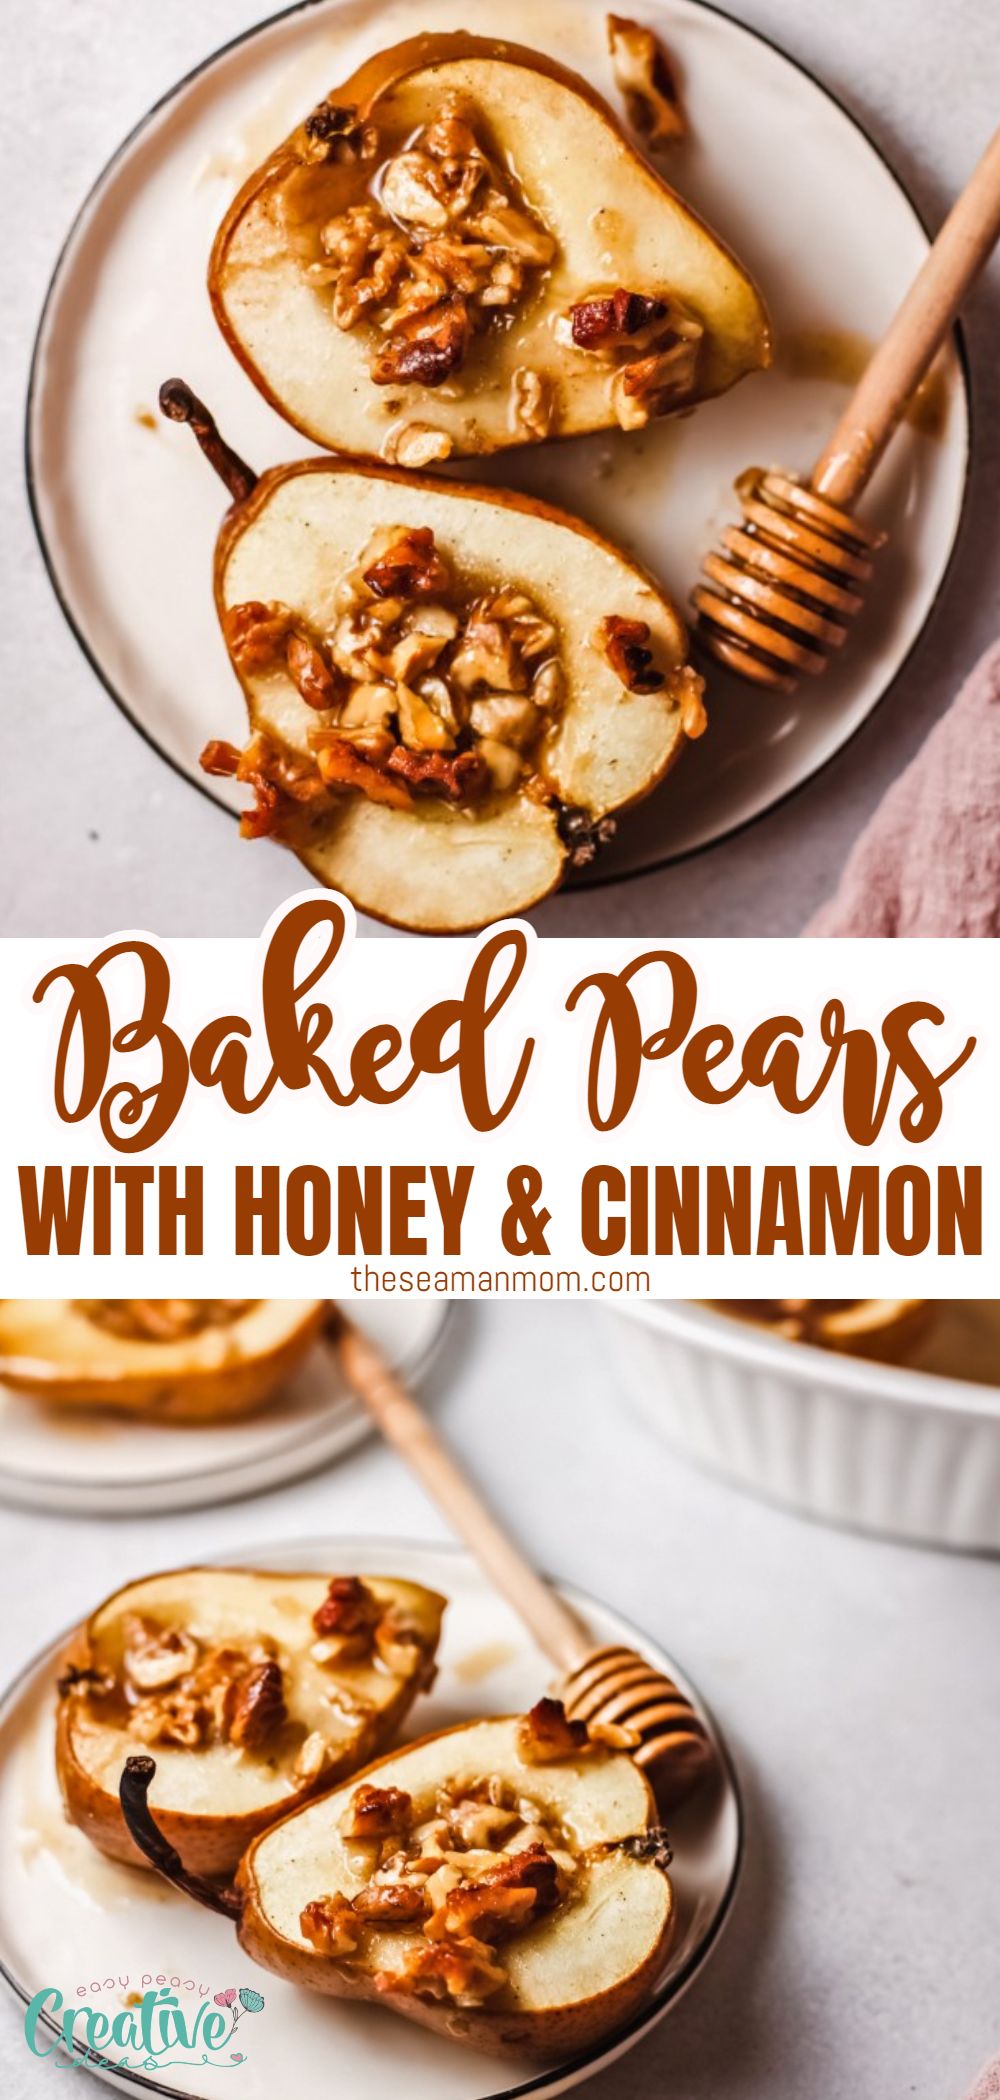 This baked pears recipe only uses four ingredients and is a sweet and easy breakfast or dessert idea! Serve these delicious baked pears with honey, pecans & cinnamon from the oven by themselves or with a spoonful of yogurt or a scoop of ice cream. via @petroneagu